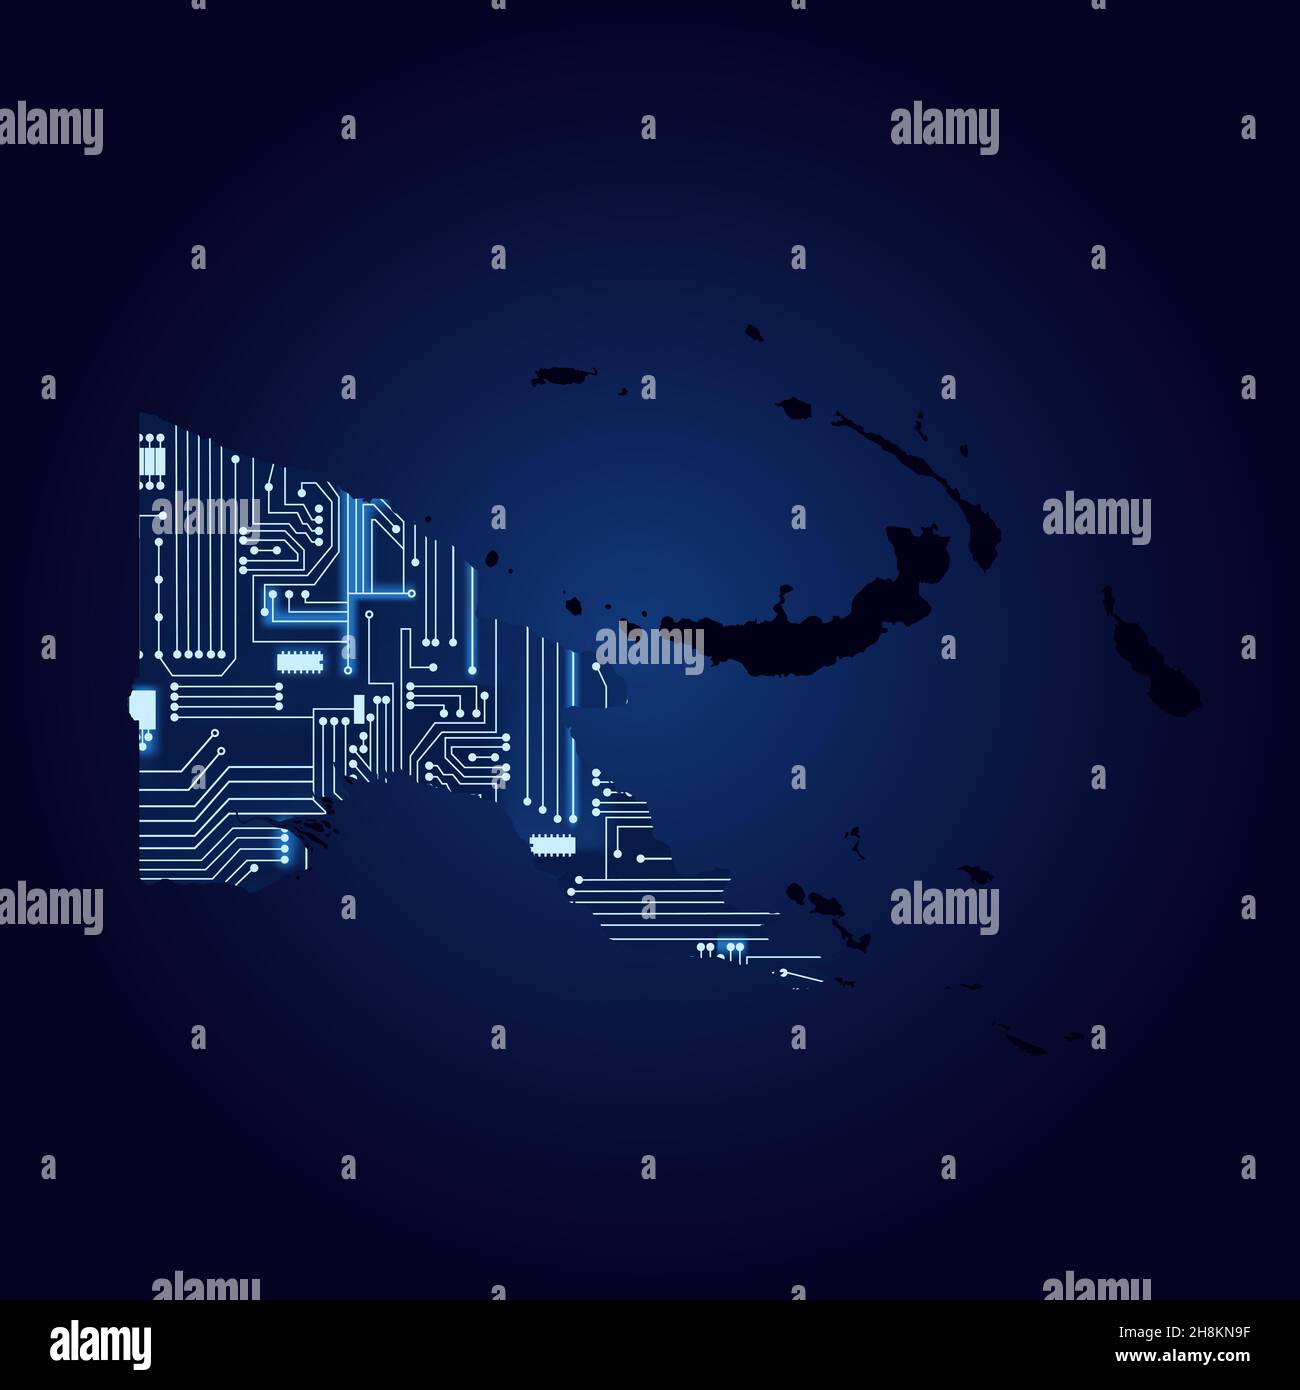 Contour map of Papua New Guinea with a technological electronics circuit. Stock Vector